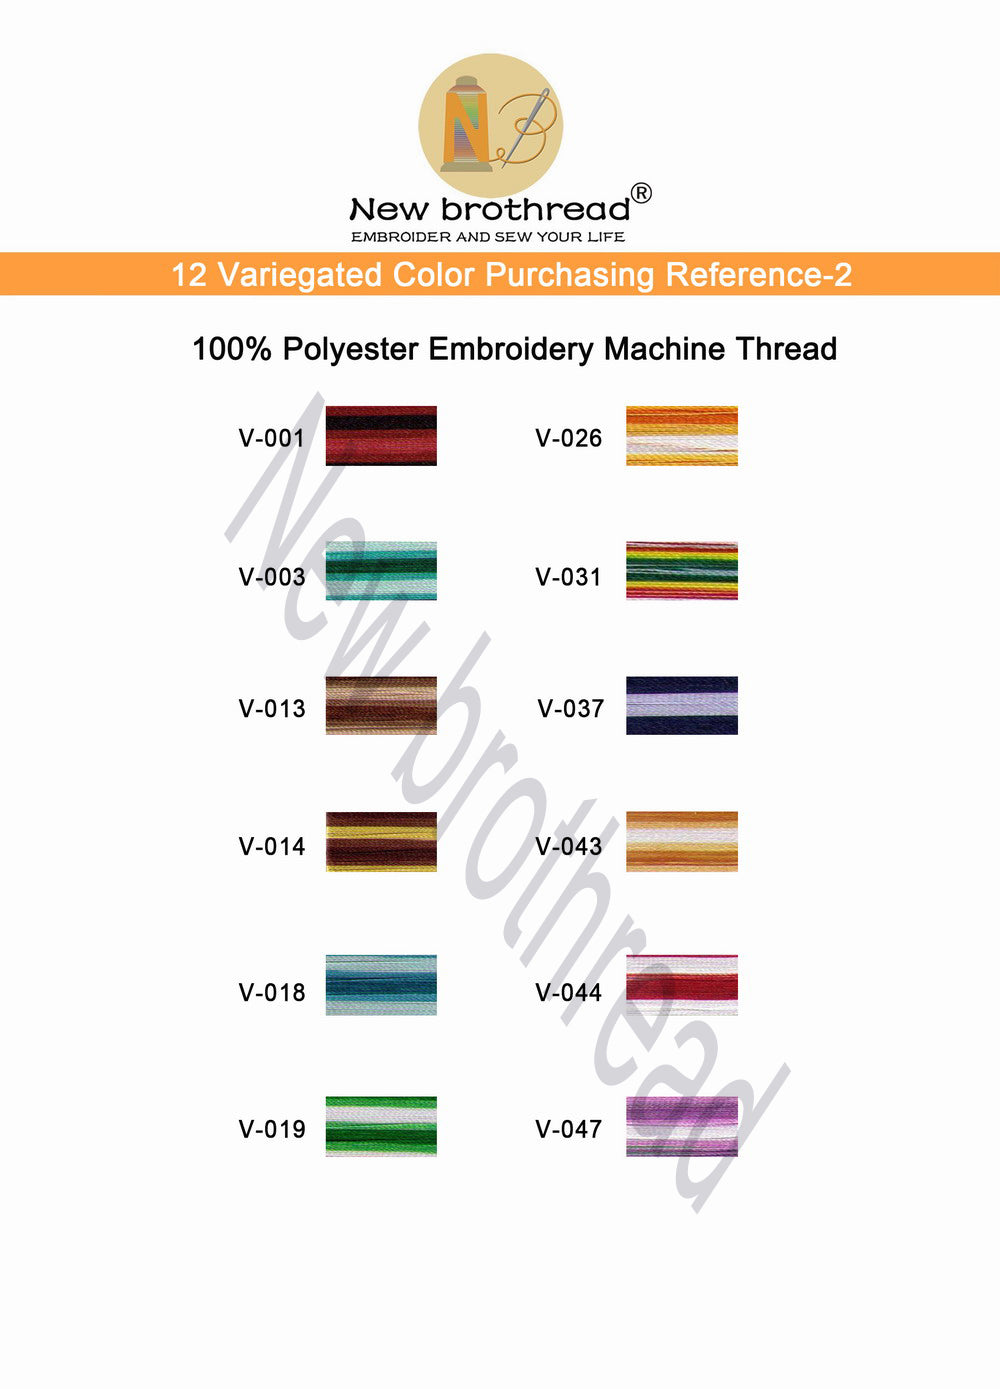 Brothread 50 Colors Variegated Polyester Embroidery Machine Thread